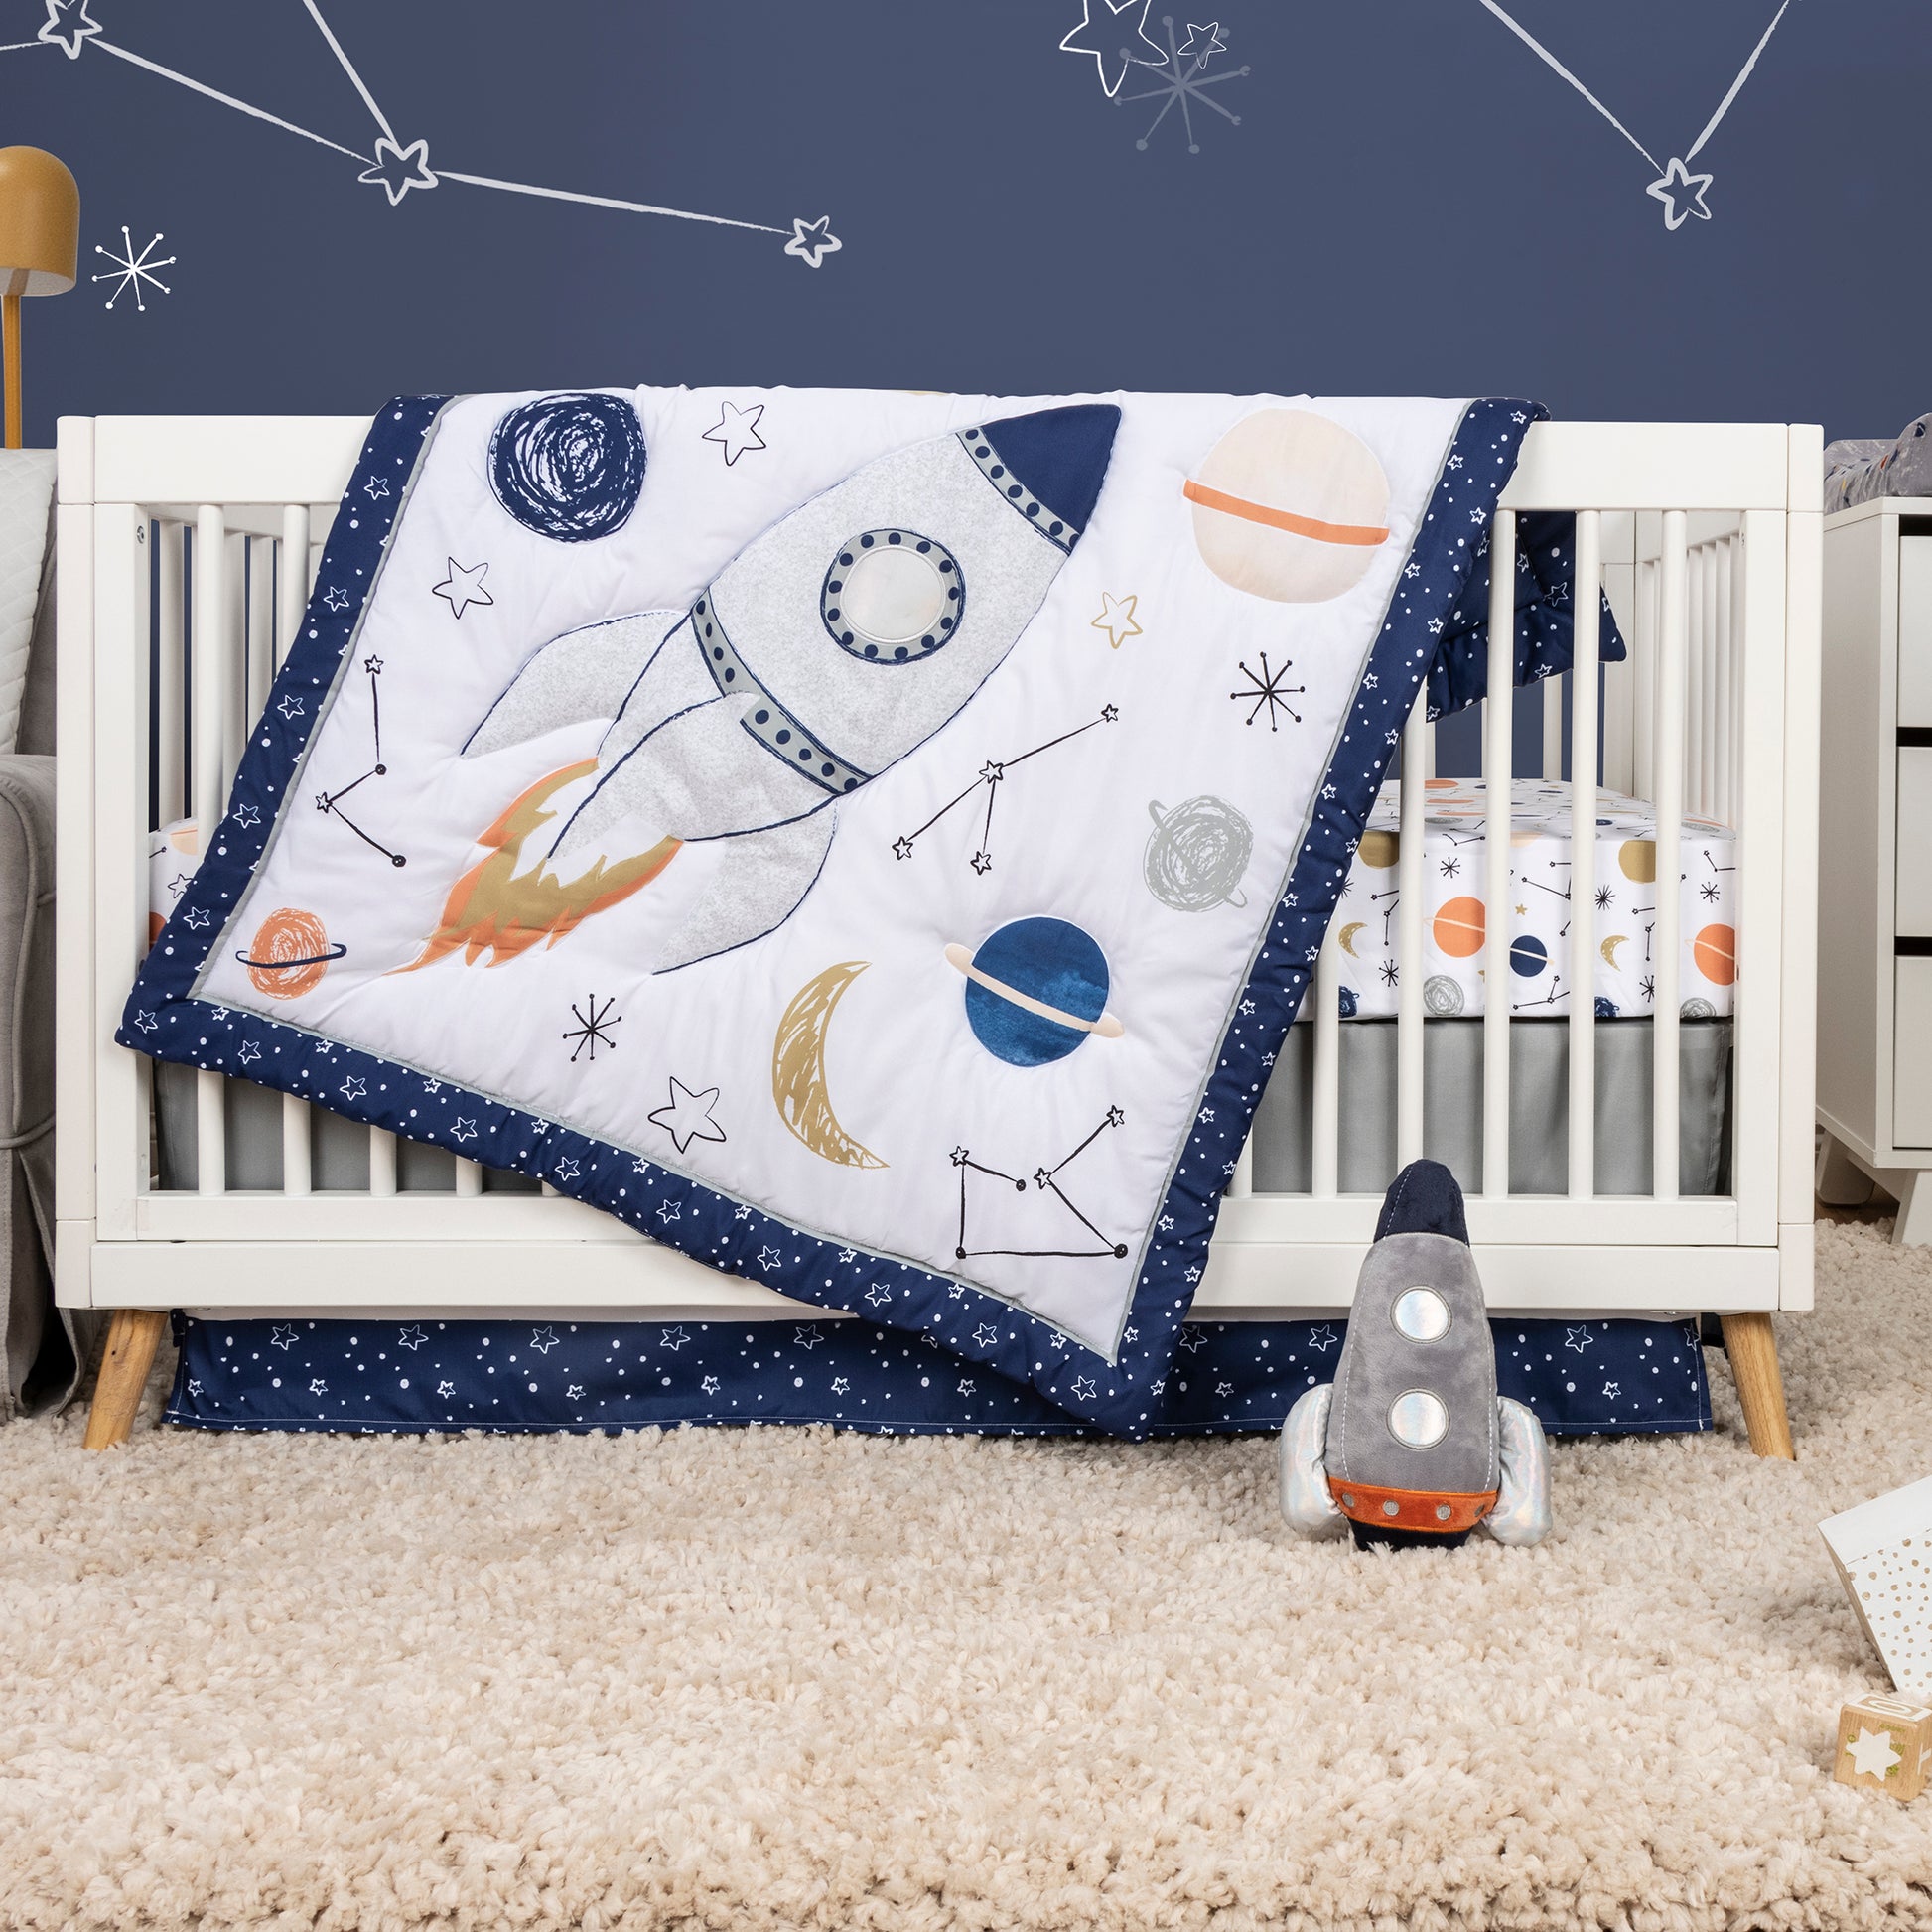  Cosmic Rocket 4 Piece Crib Bedding - stylized in room image on crib with rocket plush toy, crib quilt, crib sheet and crib skirt. All included in this space coordinating set